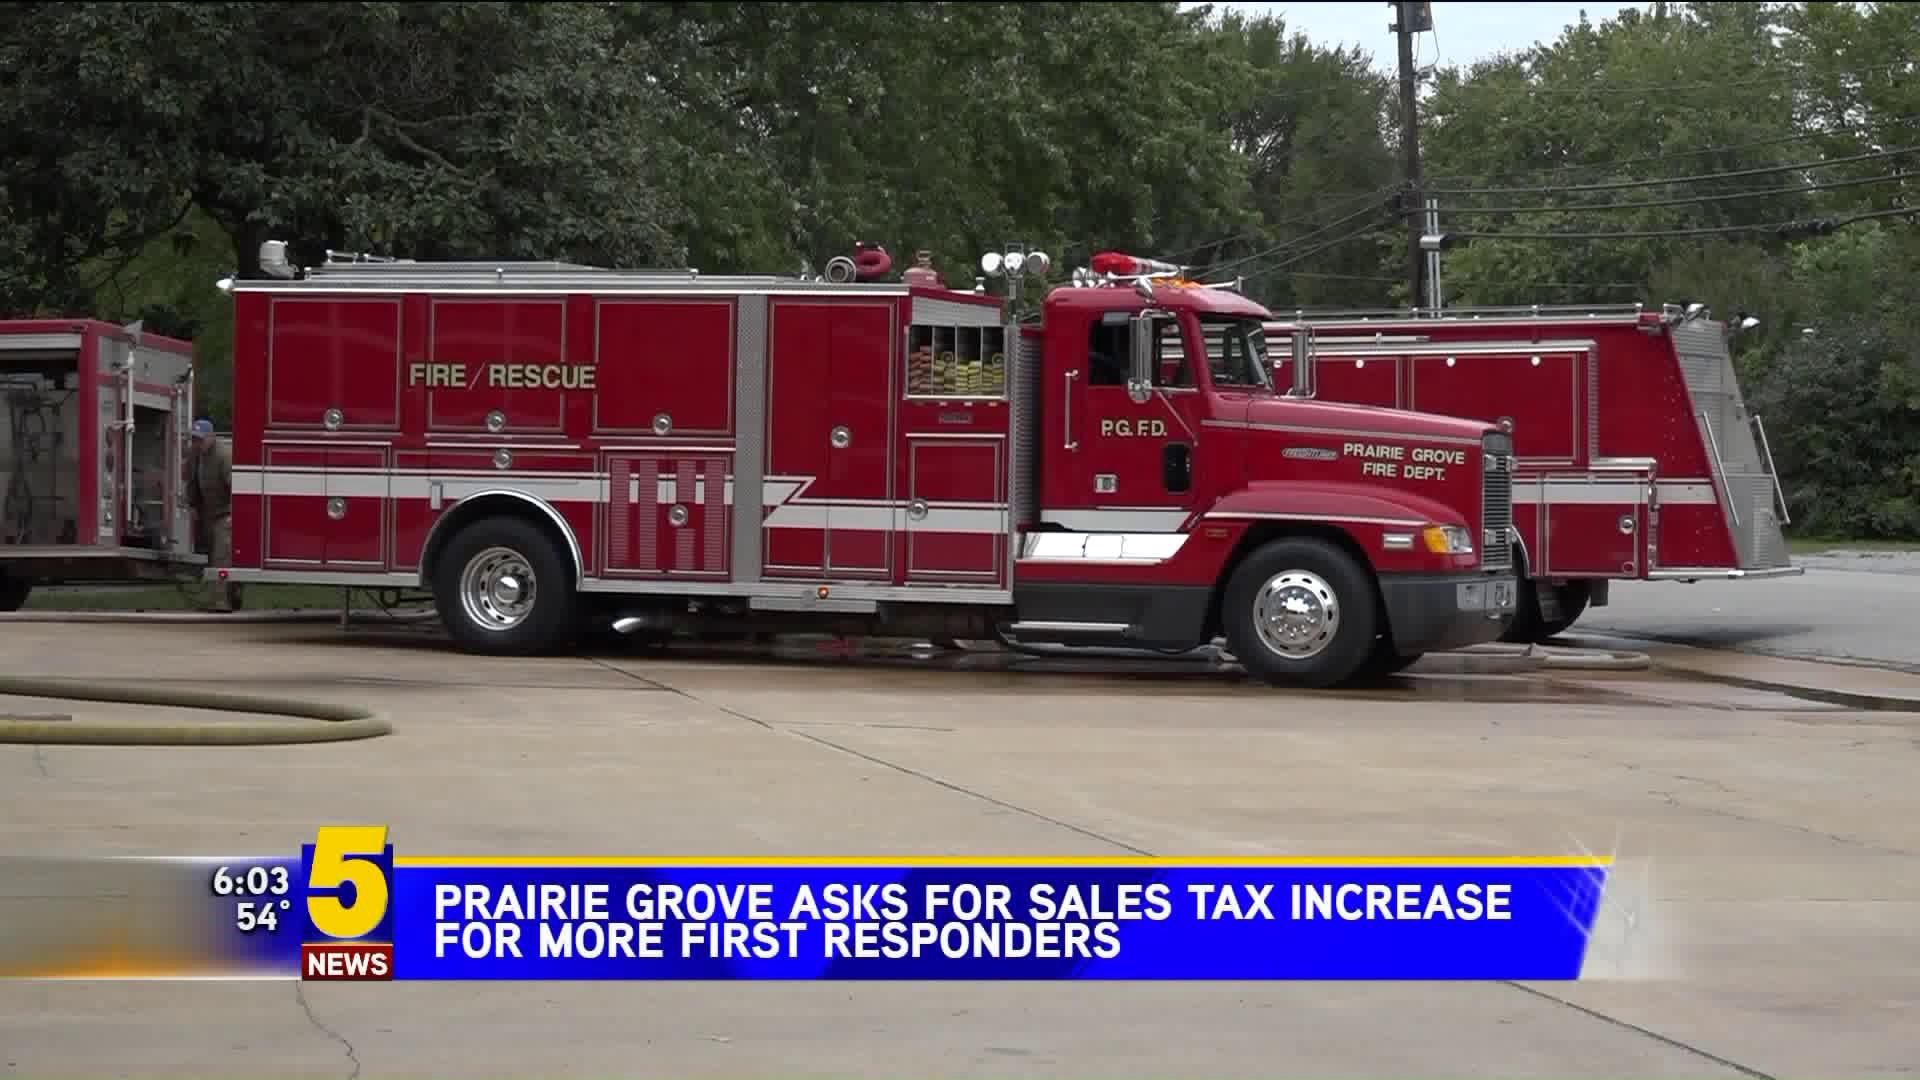 Prairie Grove Ask For Sales Tax Increase For More First Responders